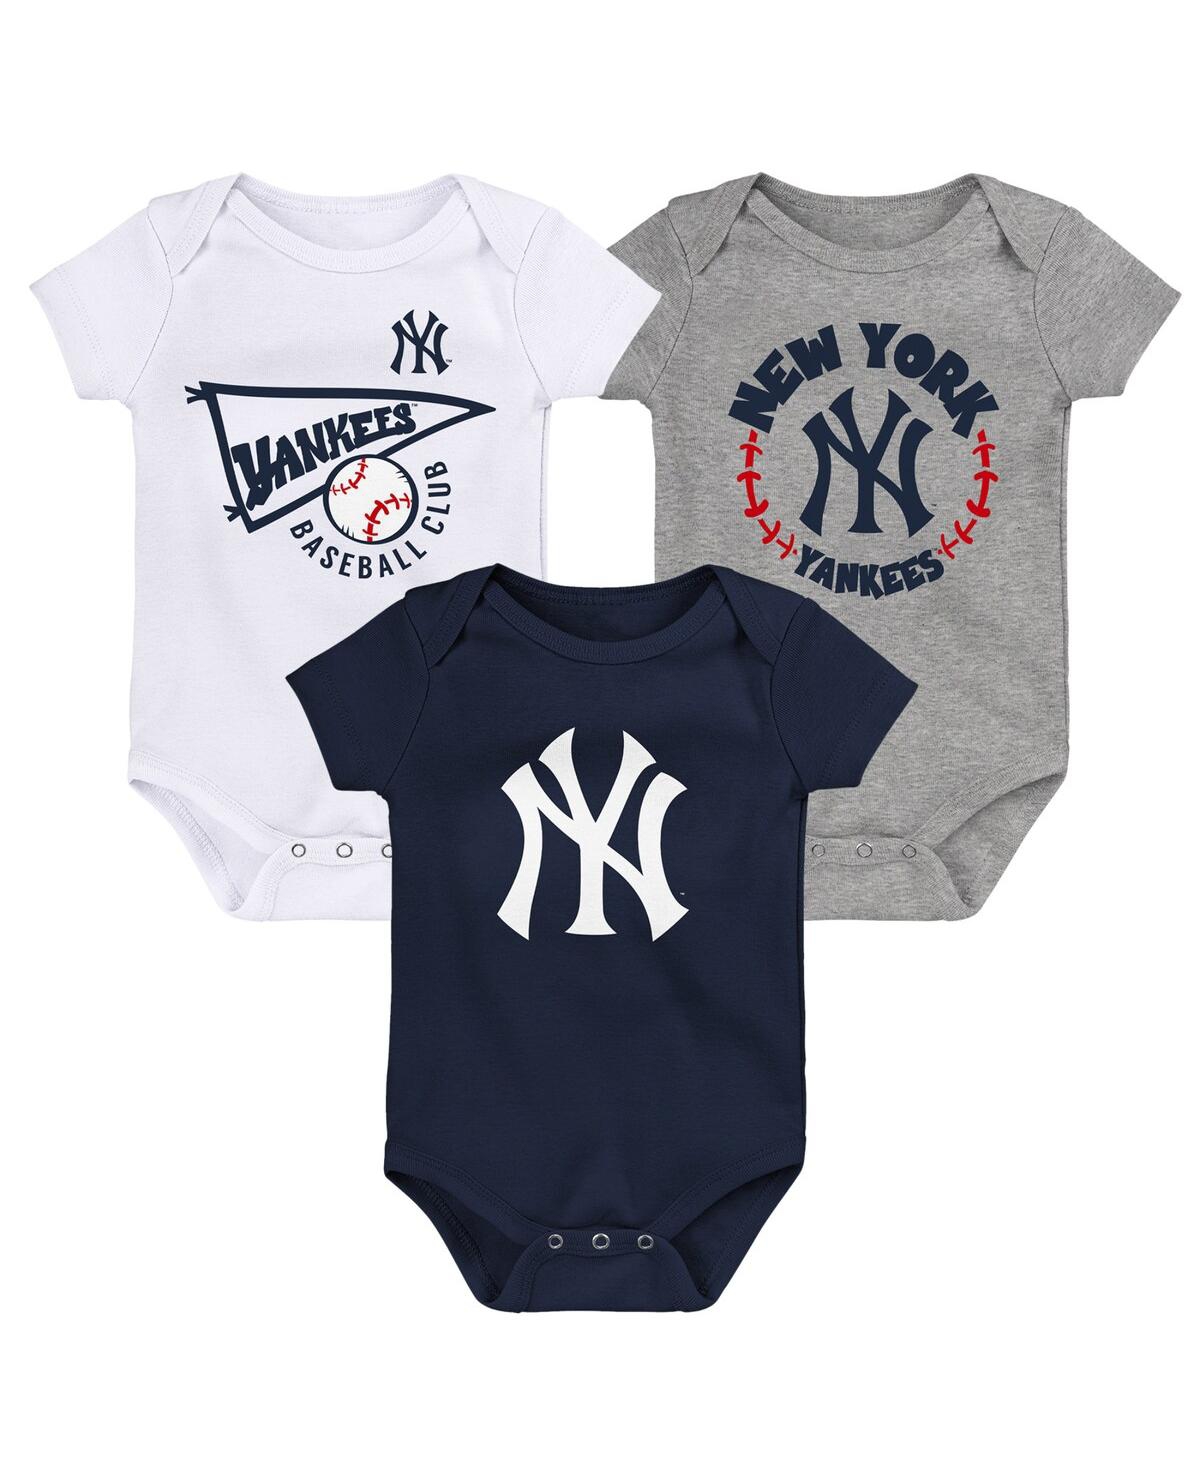 Outerstuff Babies' Infant Boys And Girls Navy, White, Heather Grey New York Yankees Biggest Little Fan 3-pack Bodysuit In Navy,white,heather Grey